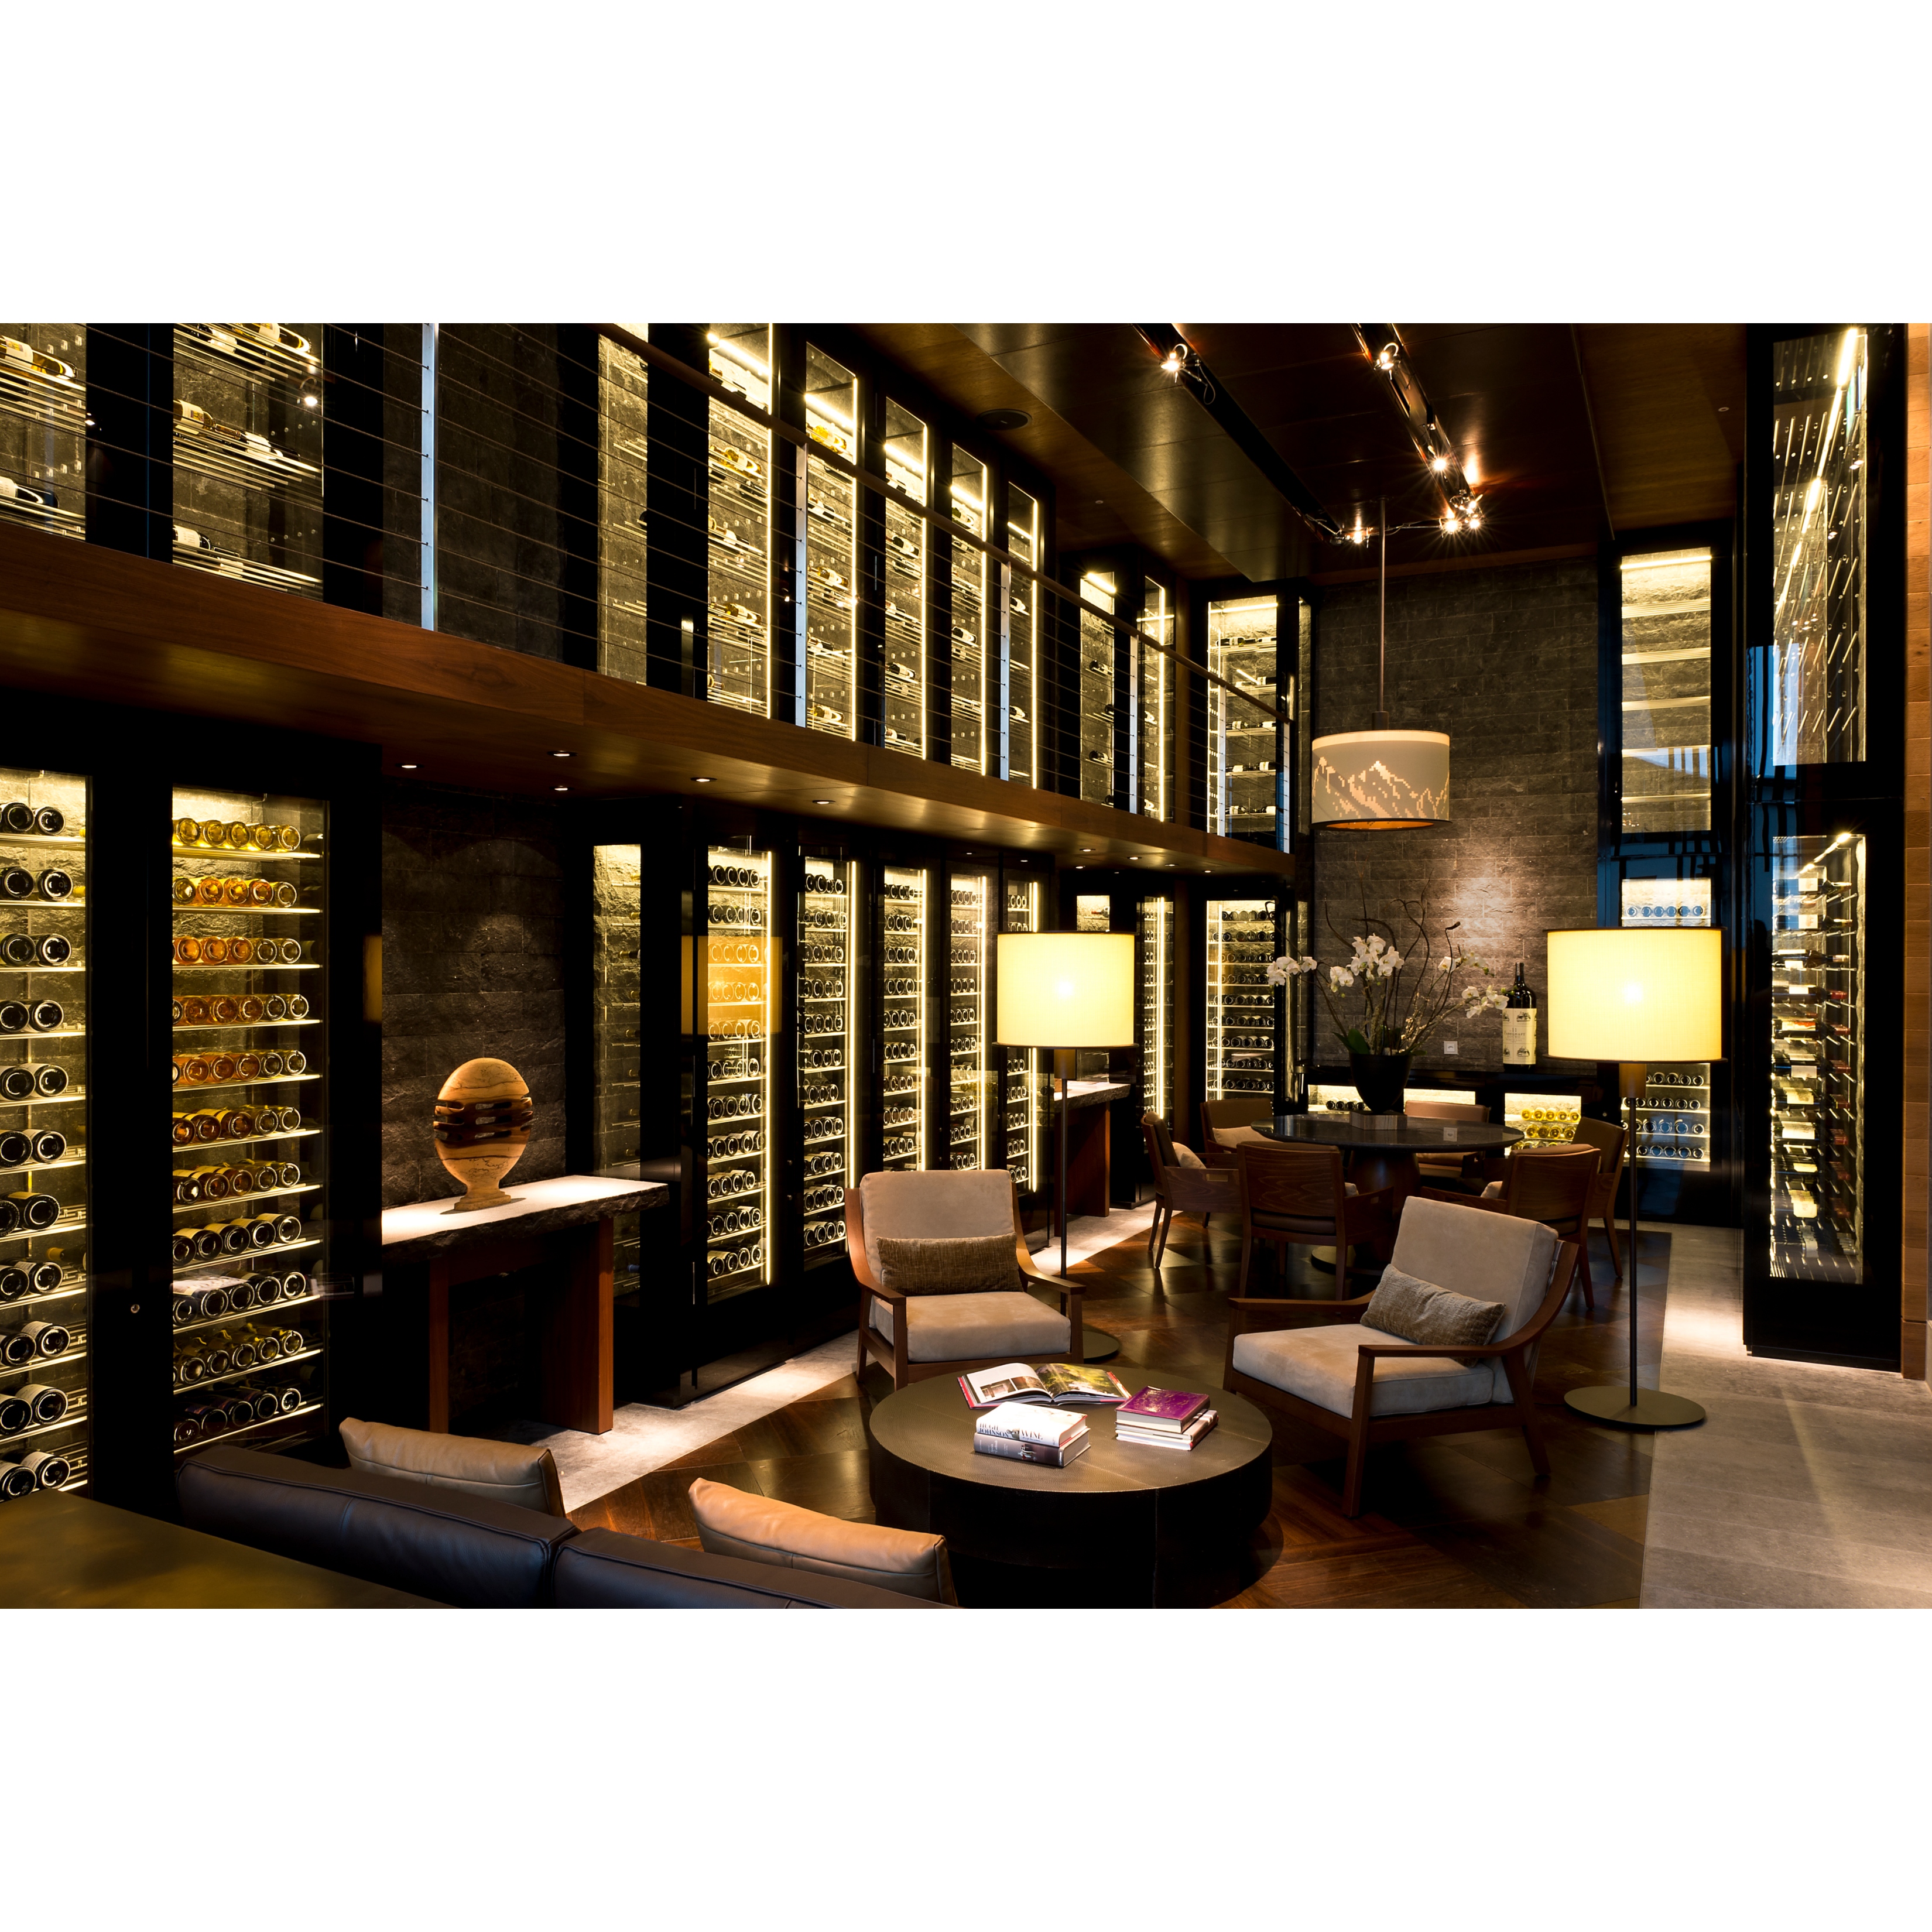 the wine library seating area inside The chedi adnermatt swiss alps hotel